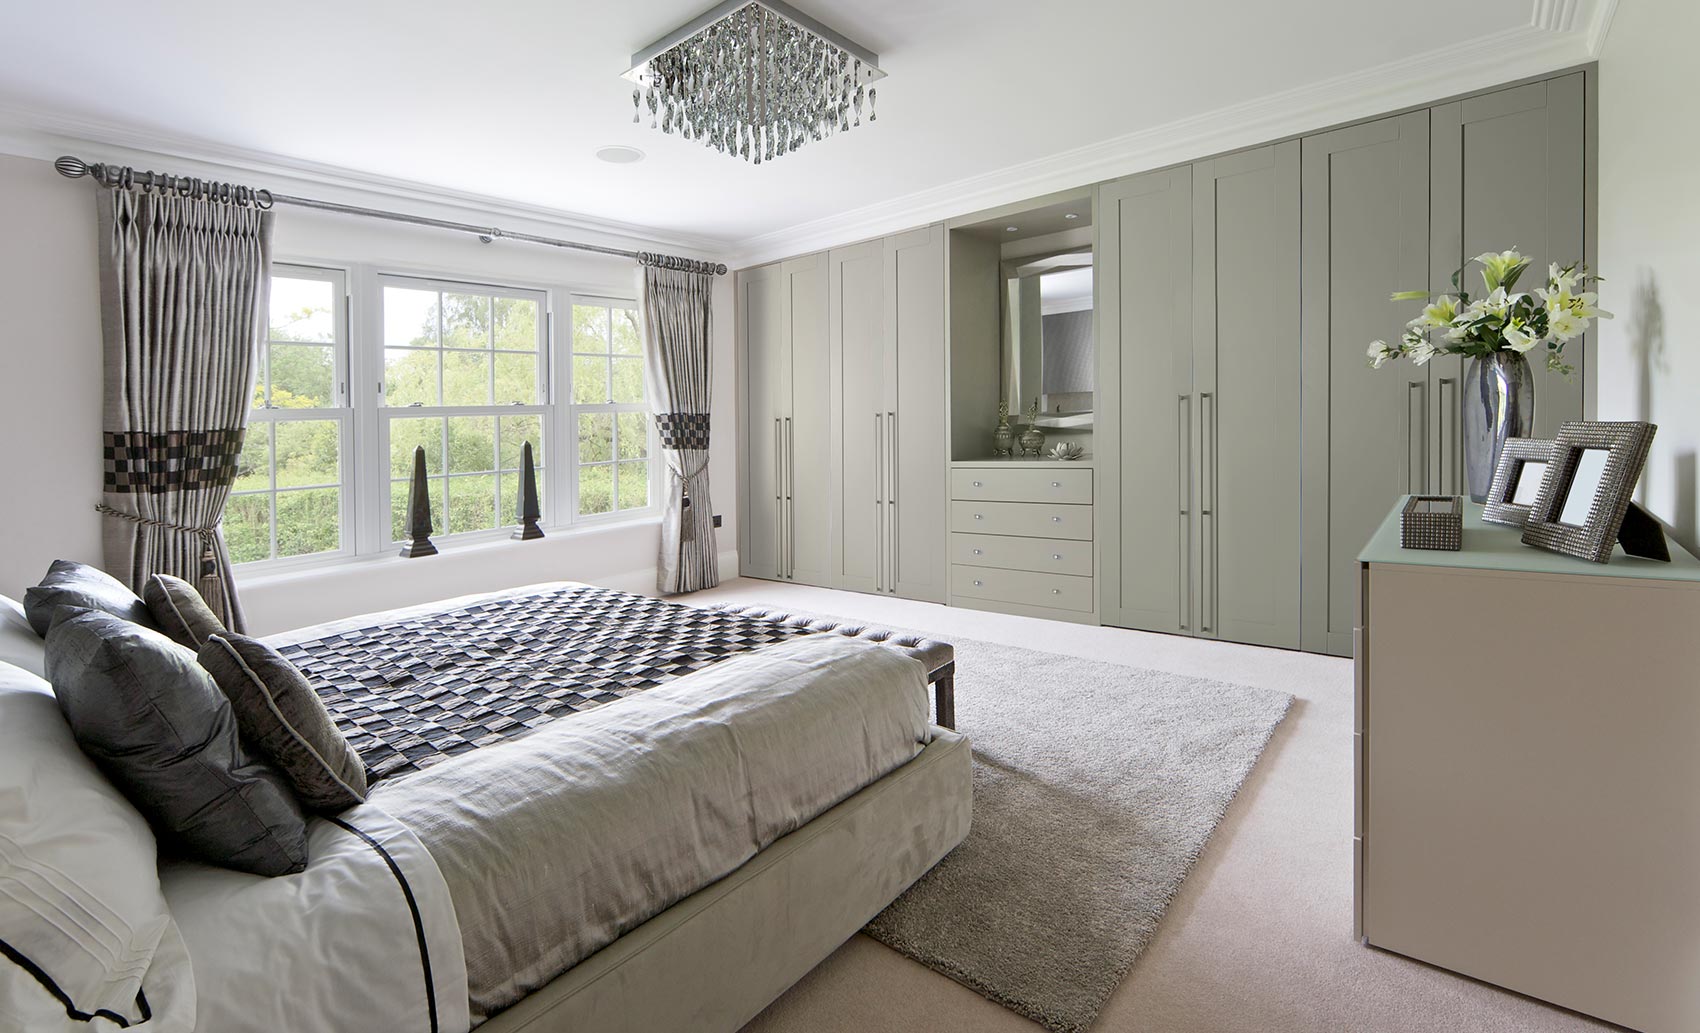 Wardrobes for the bedroom by Draks